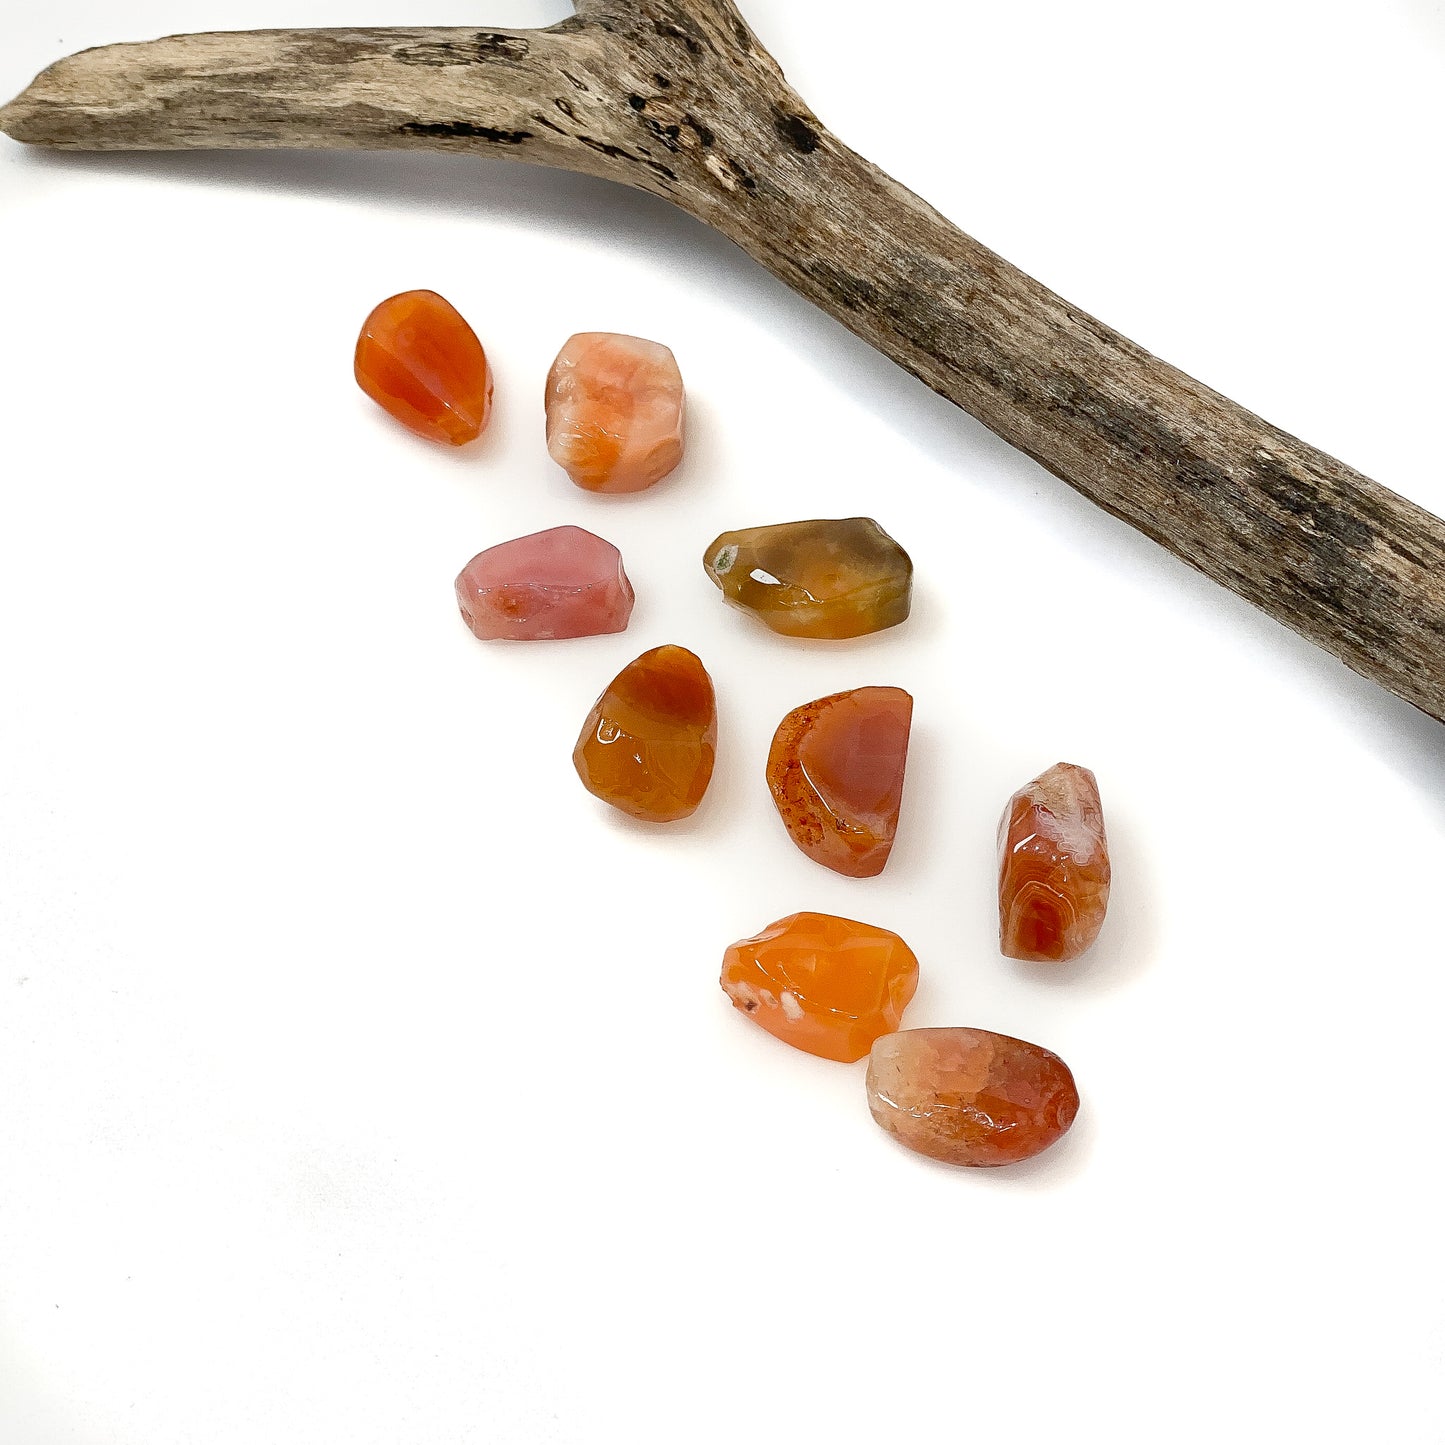 Carnelian Tumbled Tip Drilled Nugget Bead (3 pcs.) - 20mm Color Varies